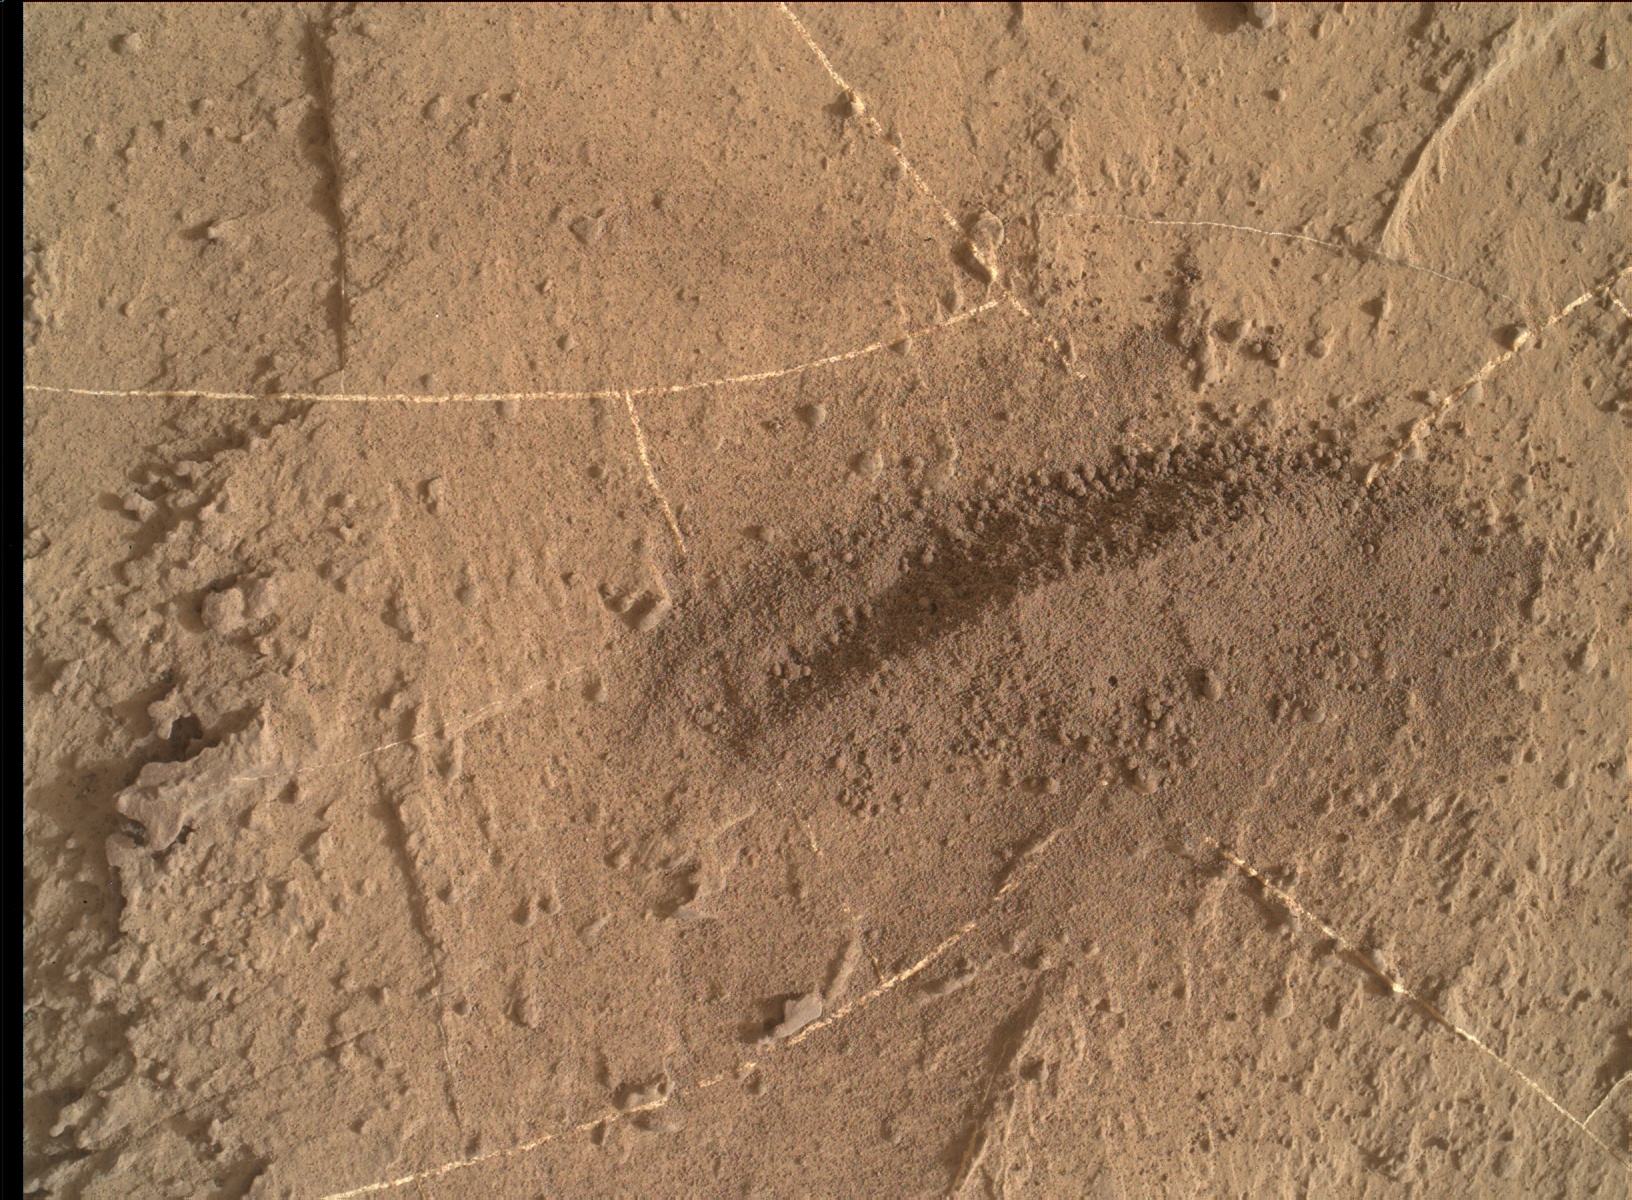 Nasa's Mars rover Curiosity acquired this image using its Mars Hand Lens Imager (MAHLI) on Sol 1491